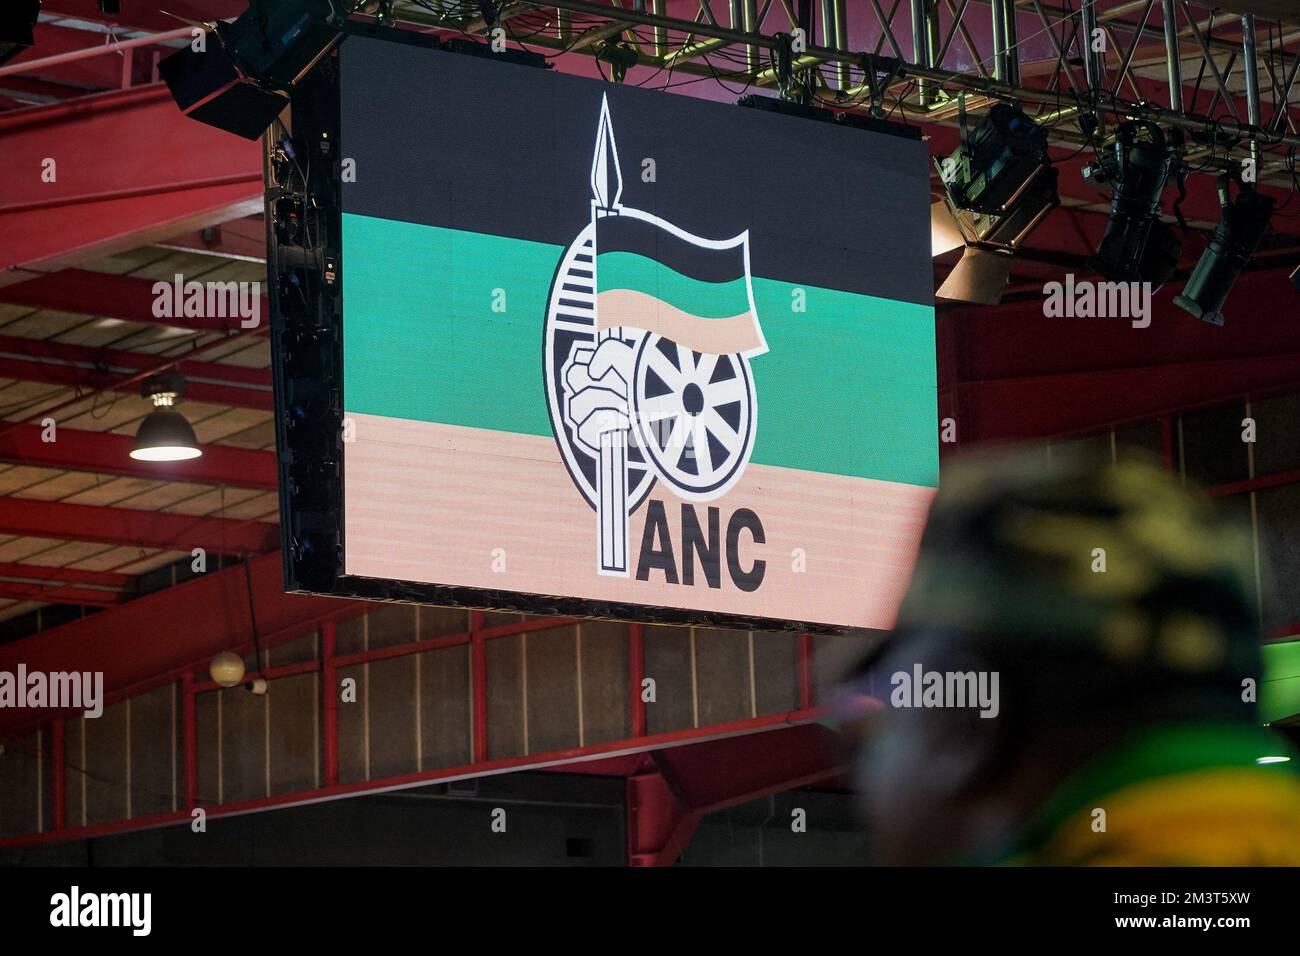 Johannesburg, South Africa. 16th Dec, 2022. An African National Congress (ANC) sign is seen on a screen during the 55th National Conference of the ANC in Johannesburg, South Africa, on Dec. 16, 2022. South Africa's governing party, the African National Congress (ANC), started its 55th national conference in Johannesburg on Friday. Credit: Str/Xinhua/Alamy Live News Stock Photo